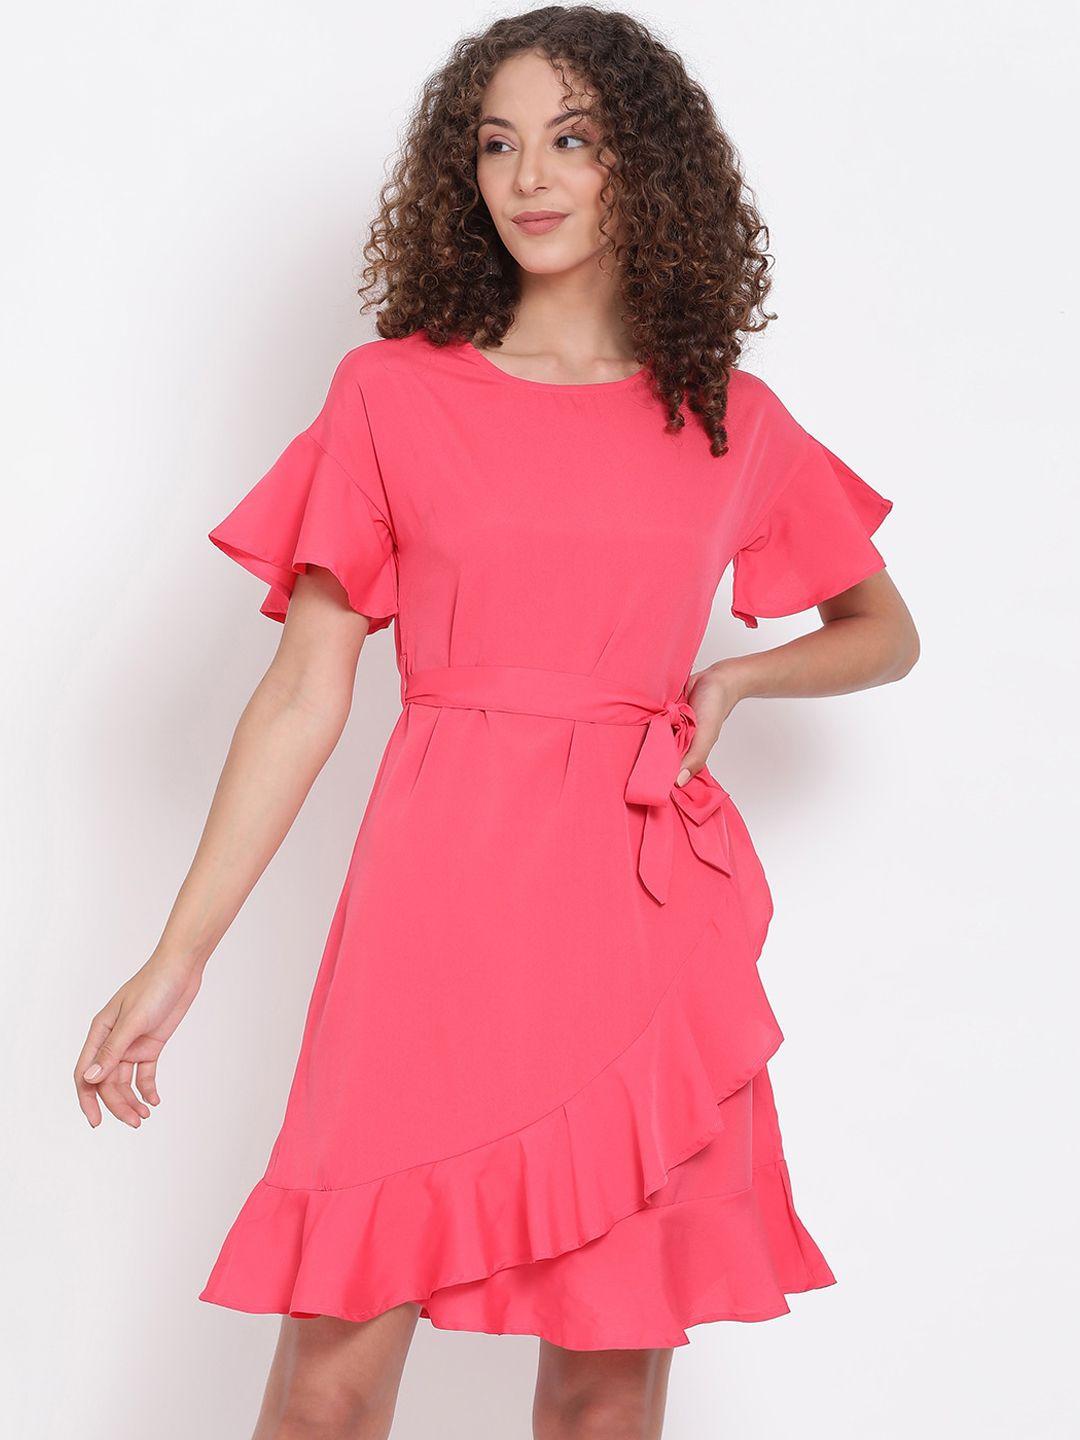 oxolloxo women pink solid a-line dress